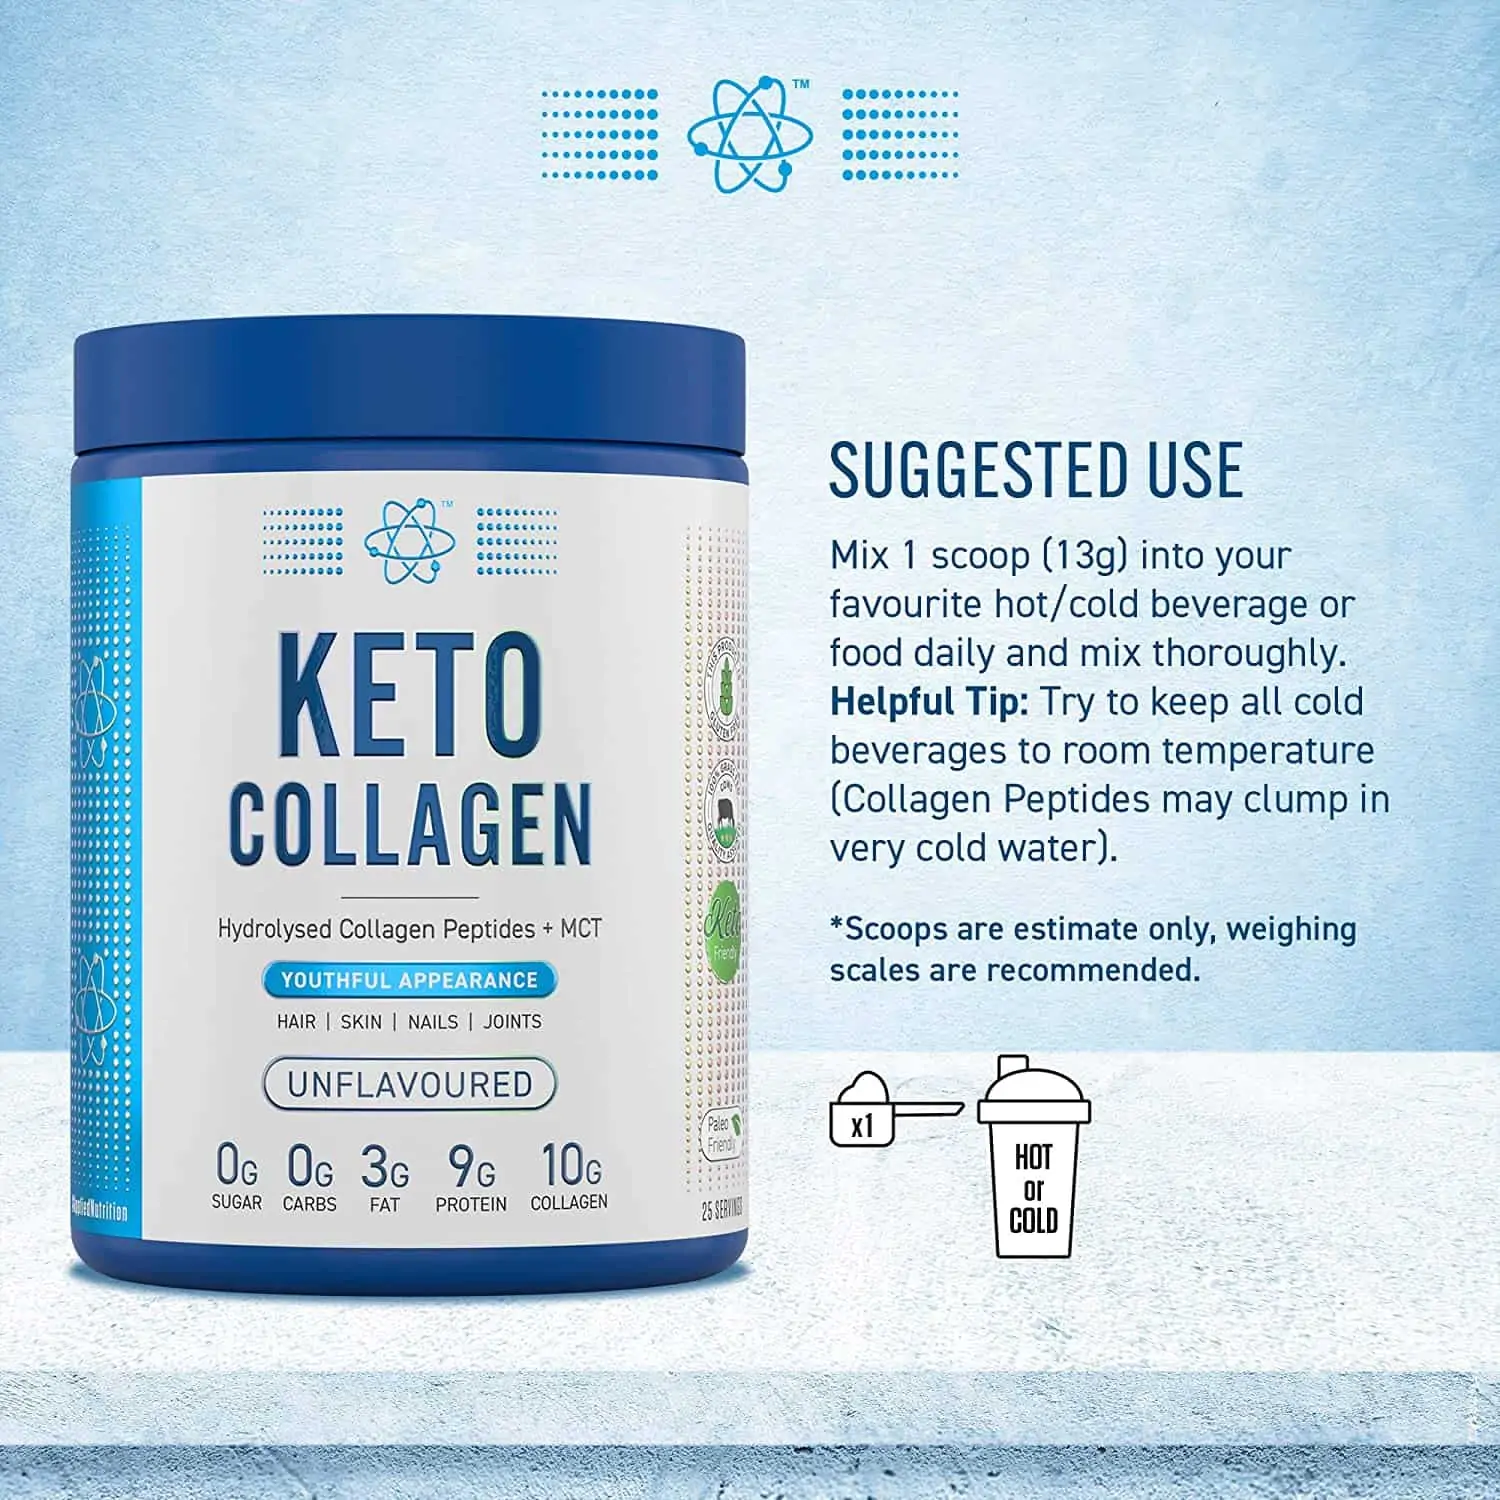 Applied Nutrition Keto Collagen 325G - low price, check reviews and dosage